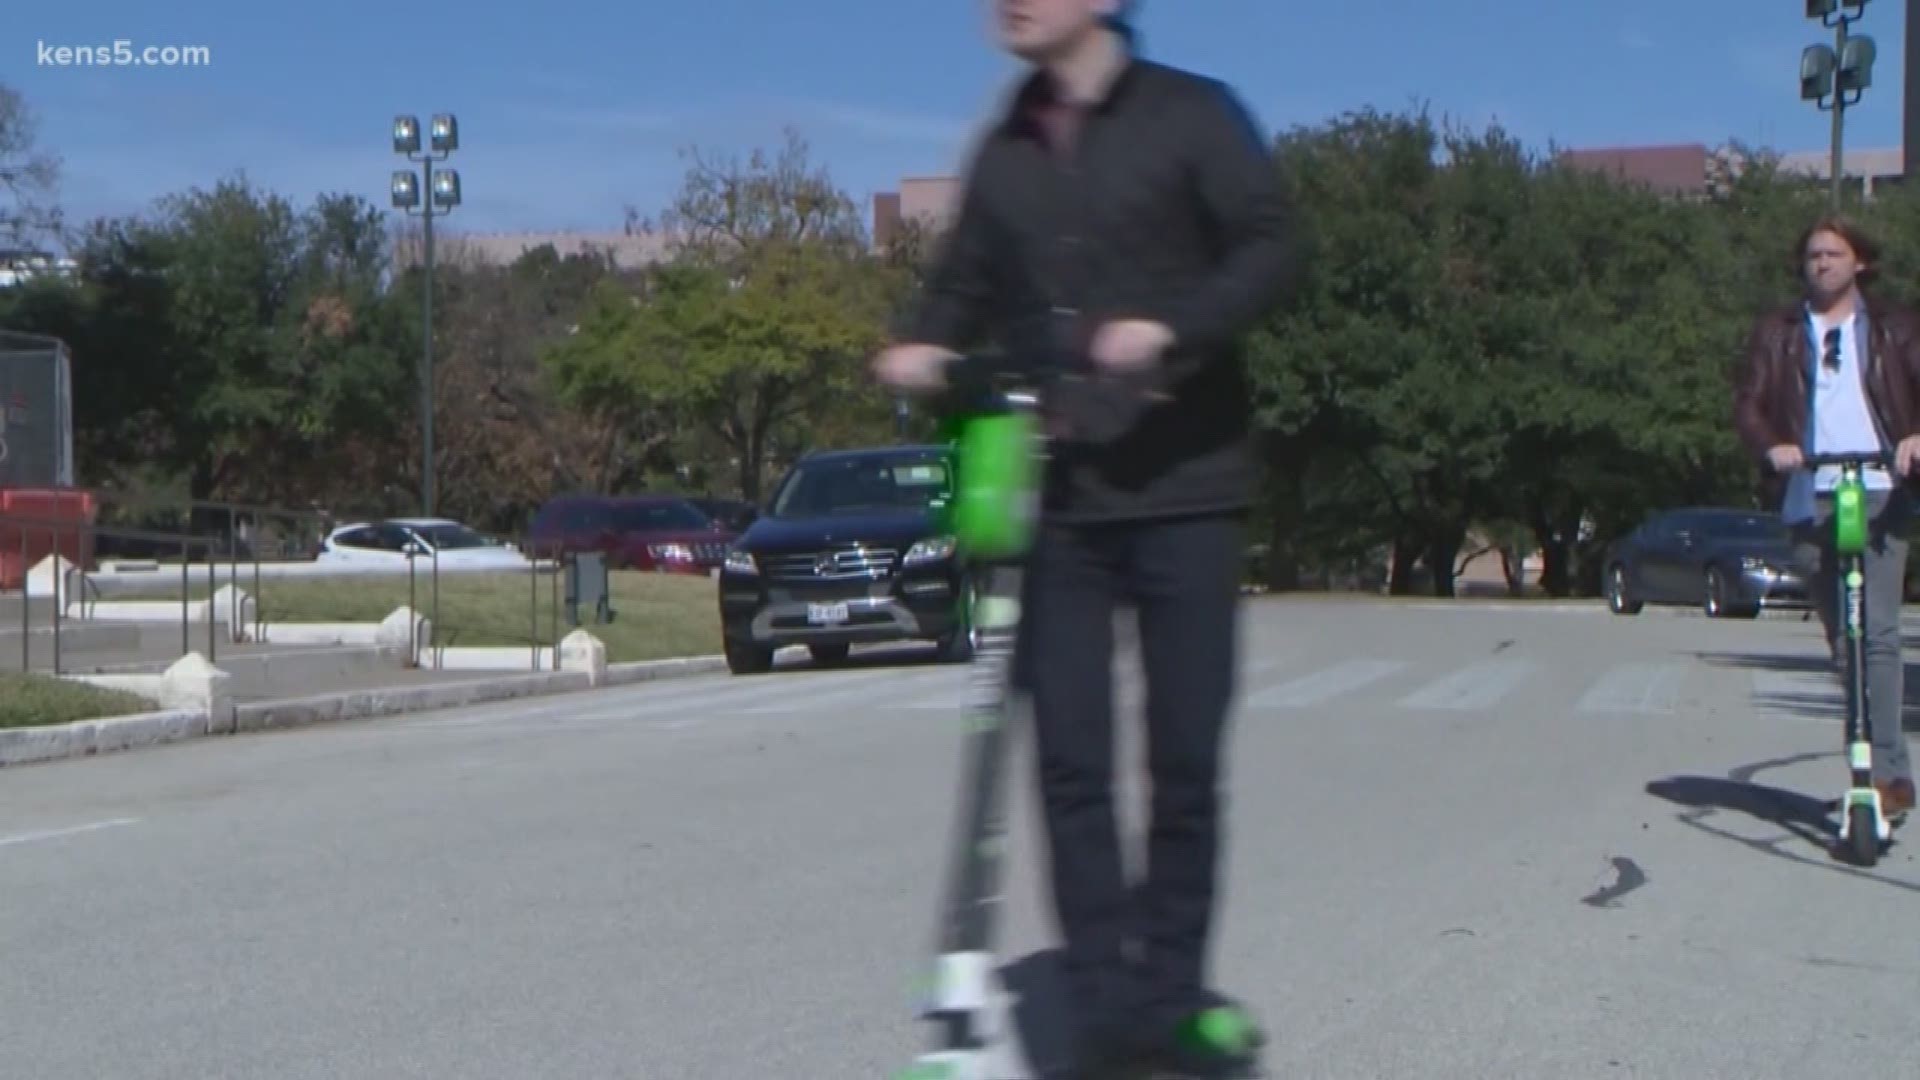 City officials and Centers for Disease Control researchers are teaming up to examine potential ties between dockless scooters and crashes.